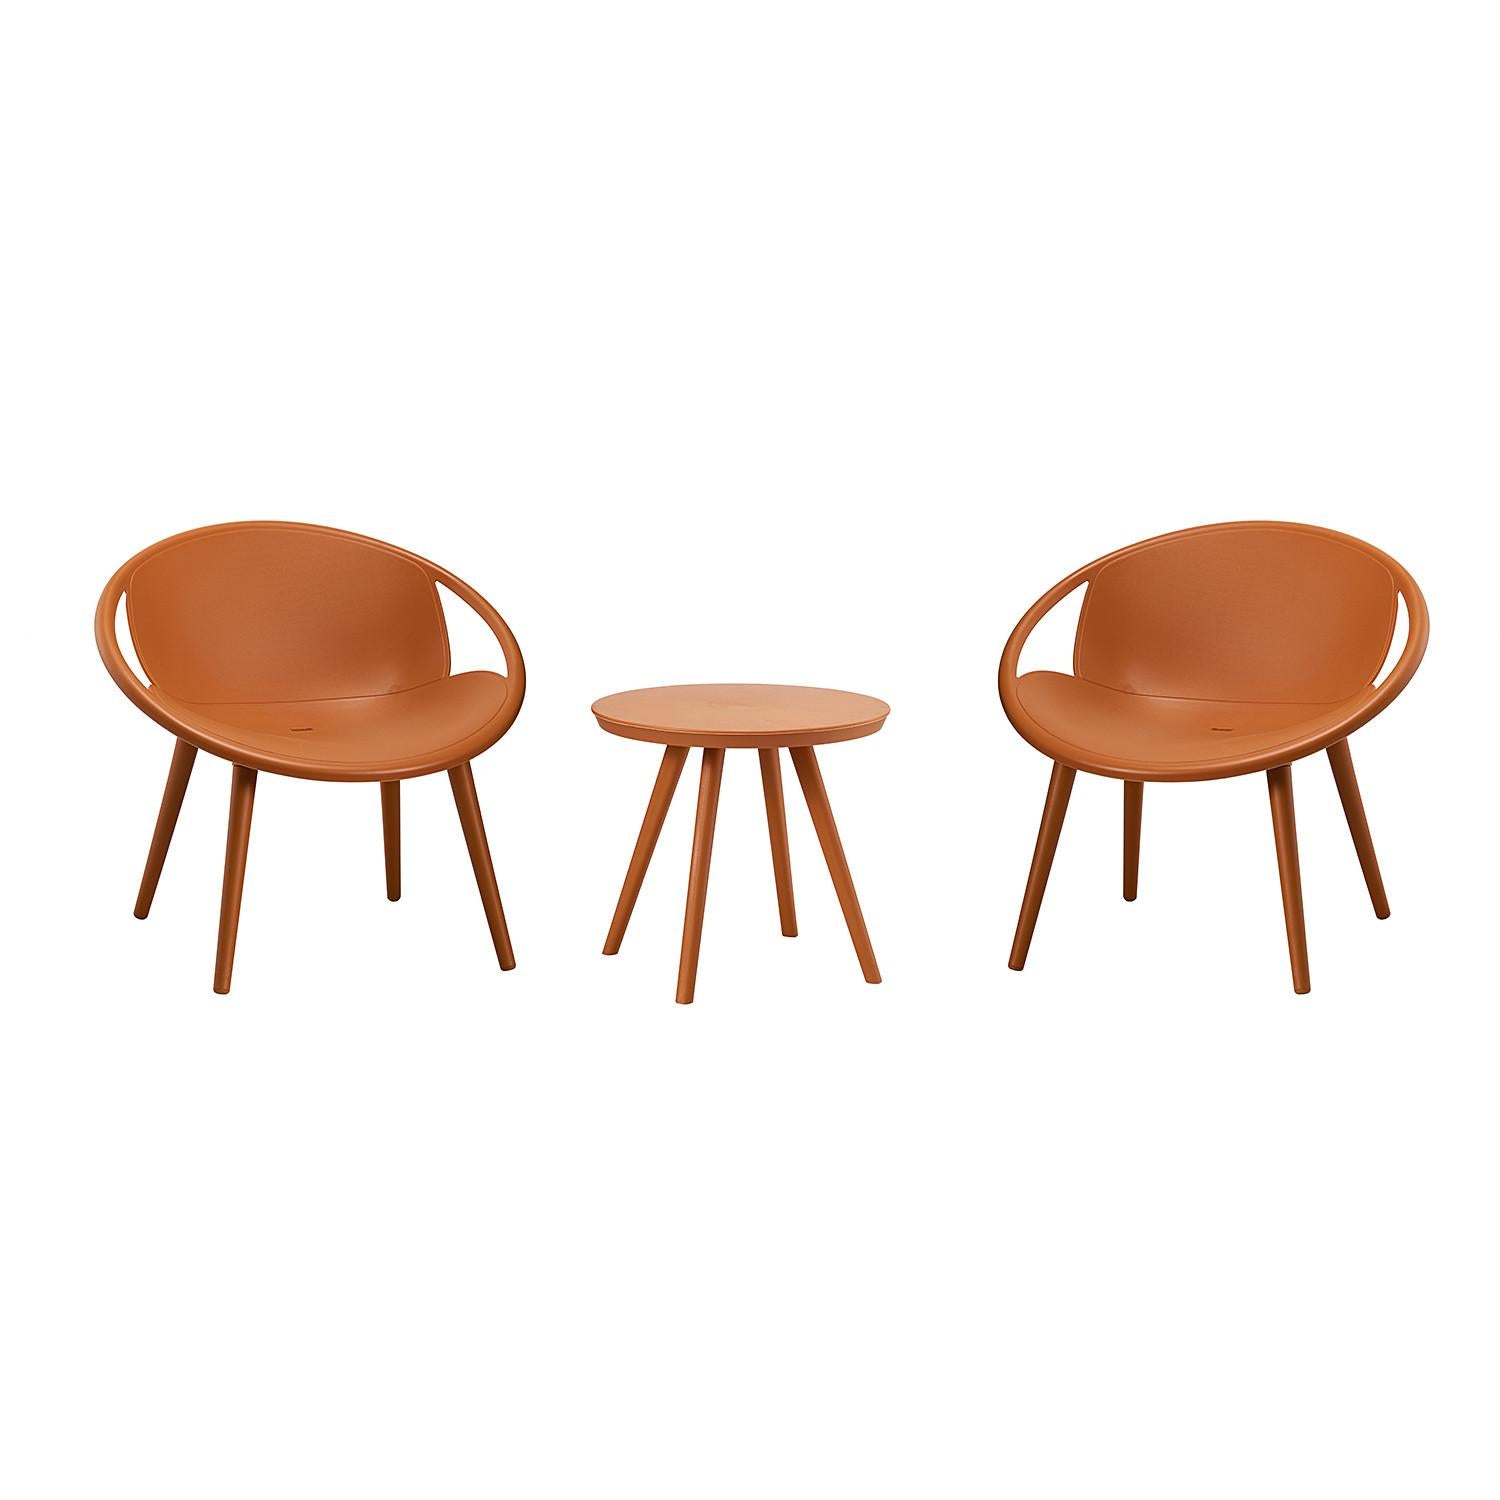 Solid Burnt Orange Saucer Outdoor Chairs and Table Set